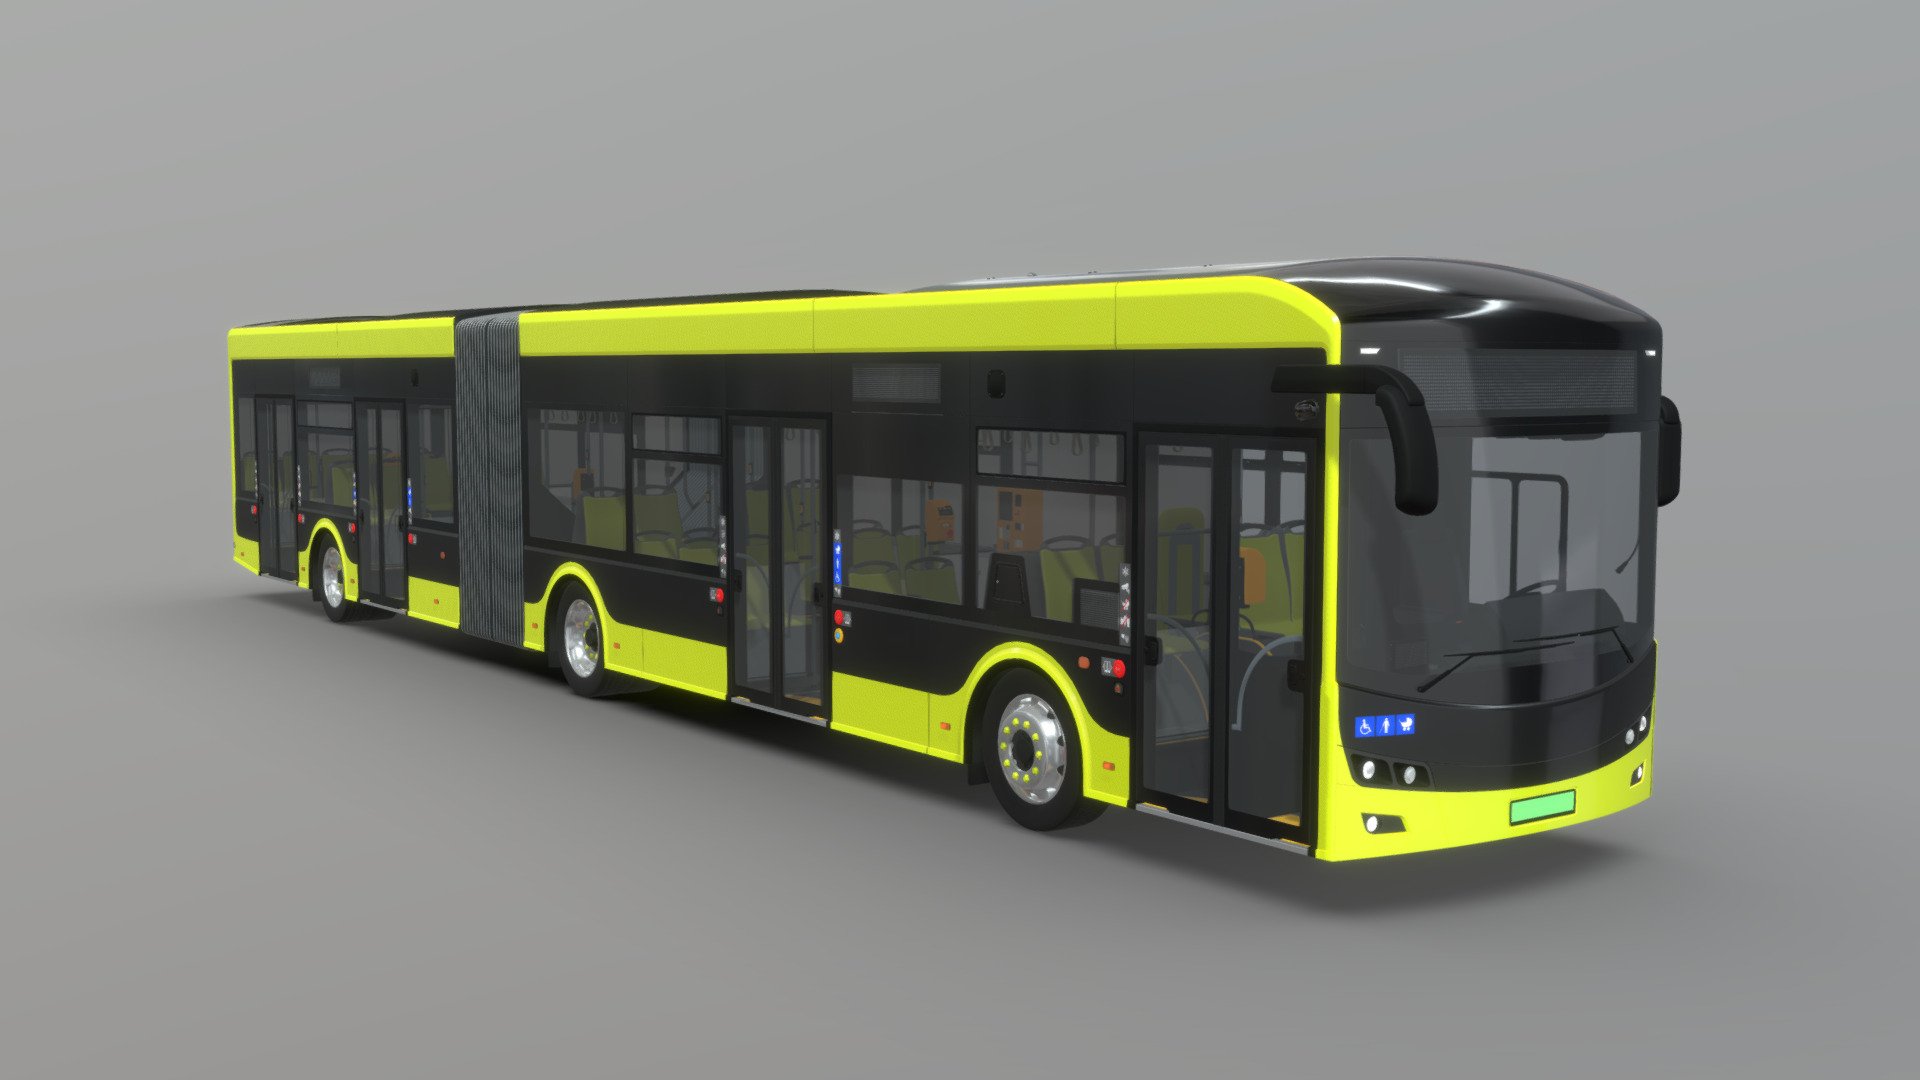 Articulated bus based on the II generation of my low-floor, emission-free, electric city bus. This version is equipped with a roof-mounted panthograph charger and has an enclosed cabin. New validators and a ticket machine were installed. Compared to the previous generation, the new model has undergone a slight lifting of the exterior. The interior has changed as well. By repositioning the engine and moving most of the batteries and other equipment to the roof of the bus, the number of seats was increased. The length: 18100mm, height: 3300mm. Number of seats: 45 (From the technical point of view, the steering wheel was seperated from the desk and is now a seperate object.) - Articulated Electric City Bus [w/ Pantograph] - Buy Royalty Free 3D model by KolorowyAnanas 3d model